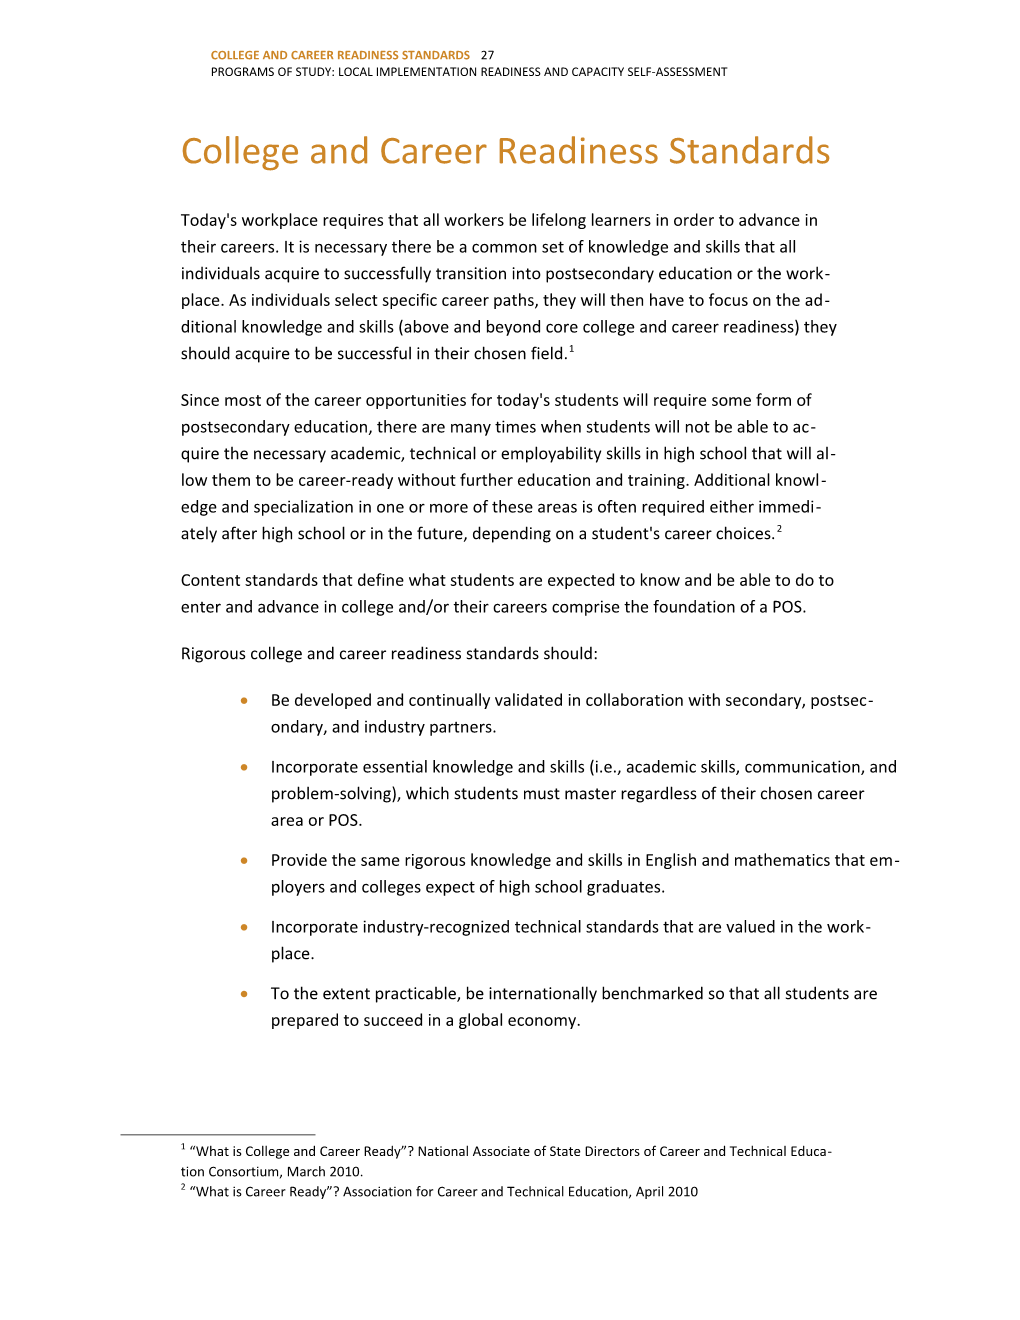 College and Career Readiness Standards